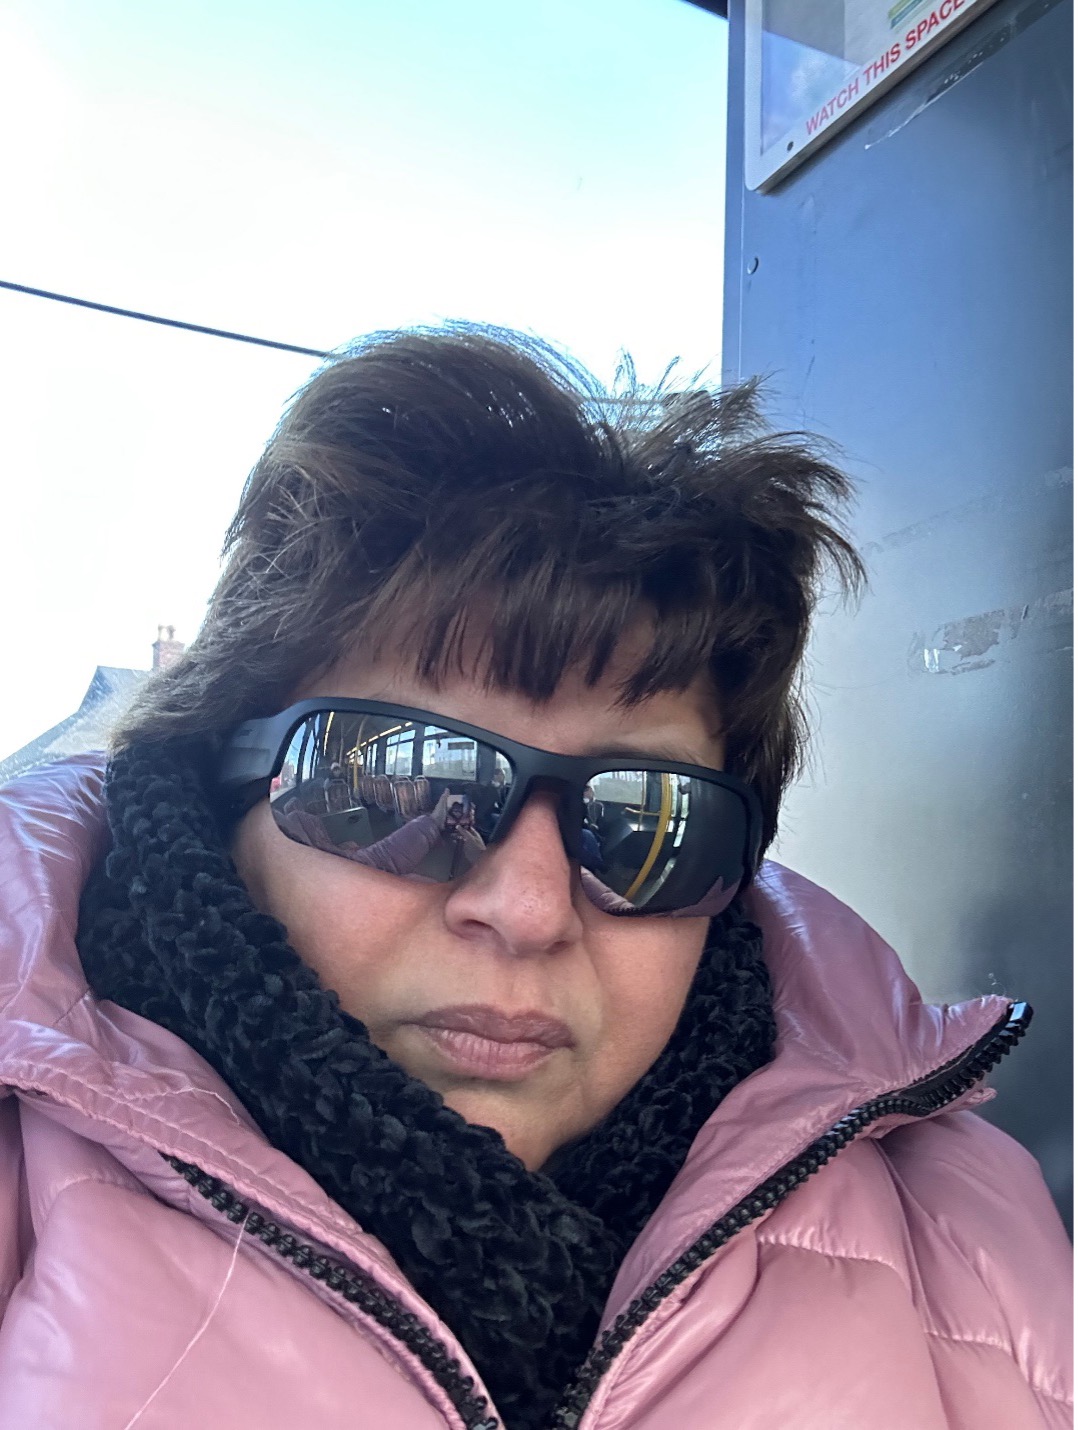 Marisa rides the bus. She’s wearing sunglasses, a pink winter coat and a black knitted scarf. The interior of a bus is reflected in her sunglasses.